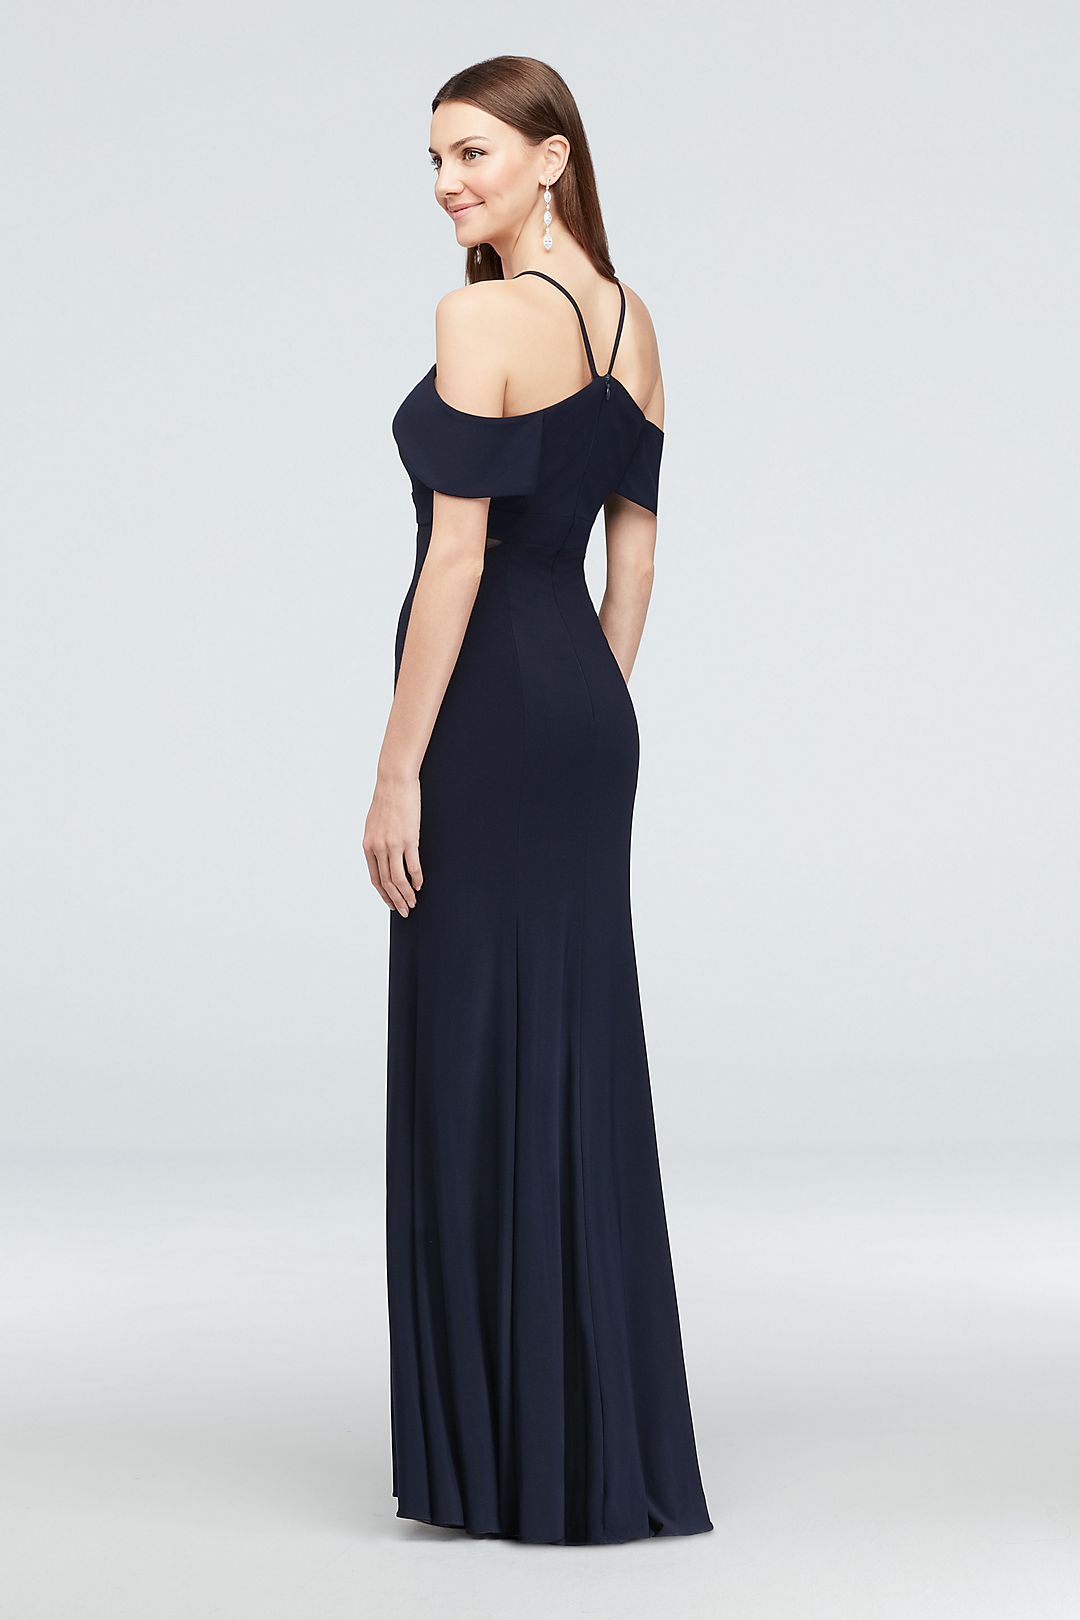 Cold Shoulder Jersey Gown with Illusion Sides Image 2